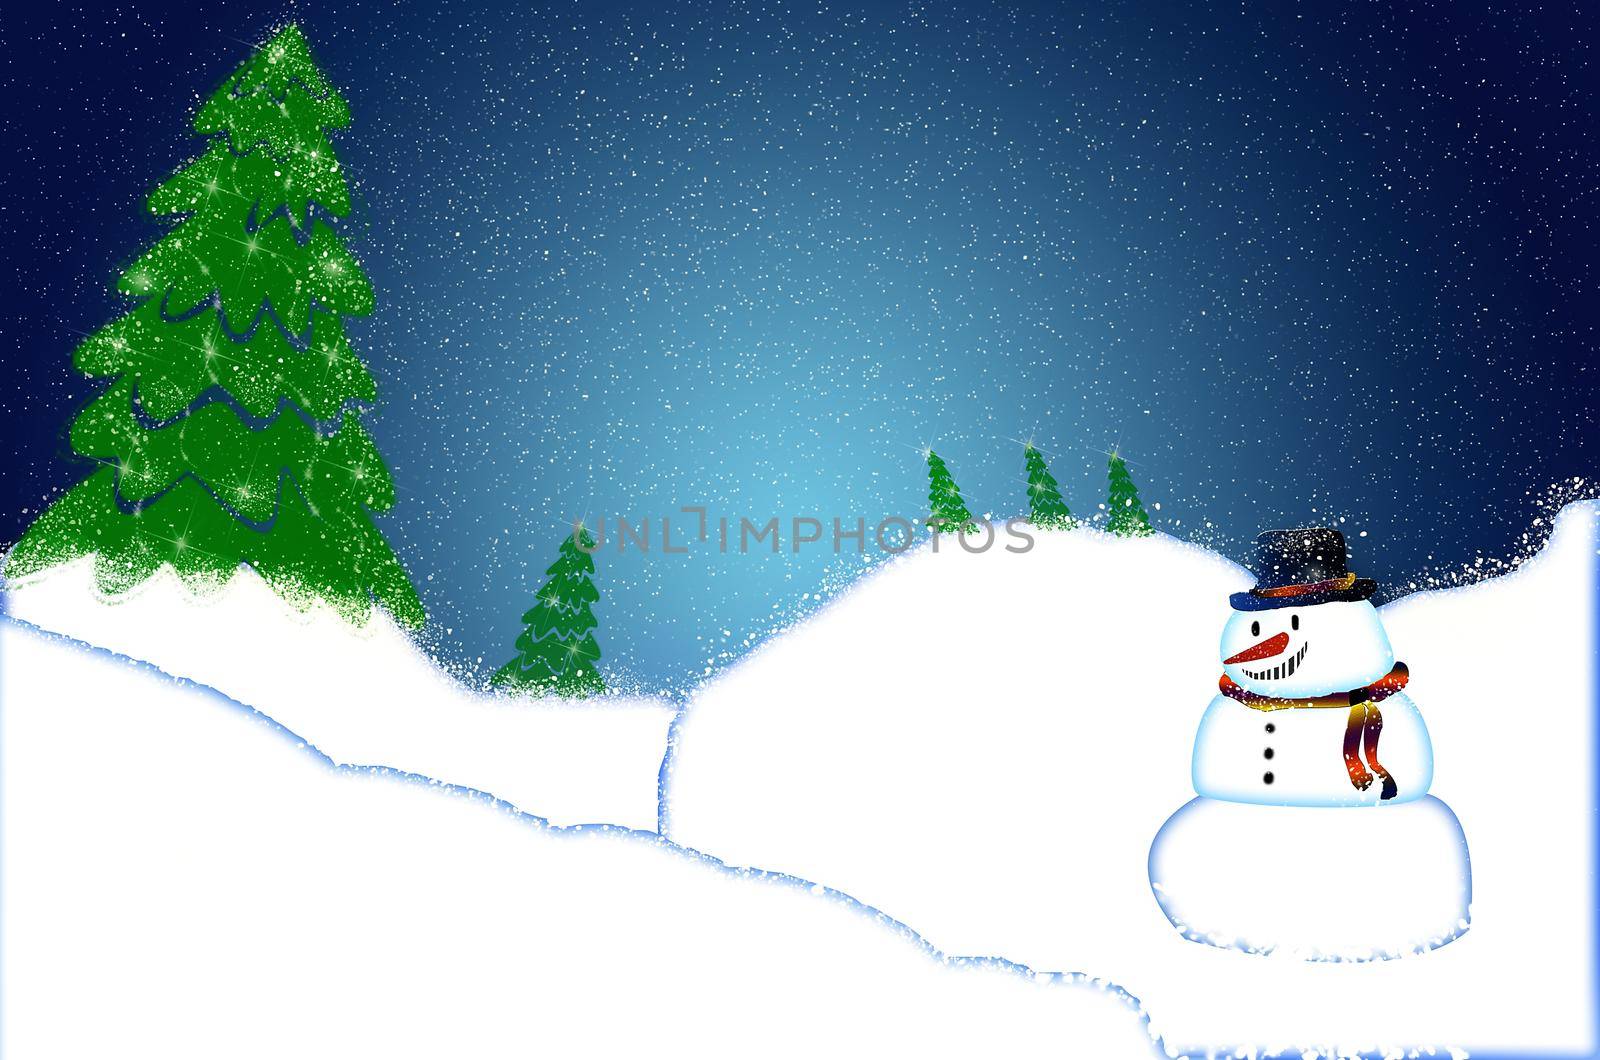 Christmas background with snowman. Snowman in the winter. Winter holidays greeting card with snow scene winter landscape. Stock illustration